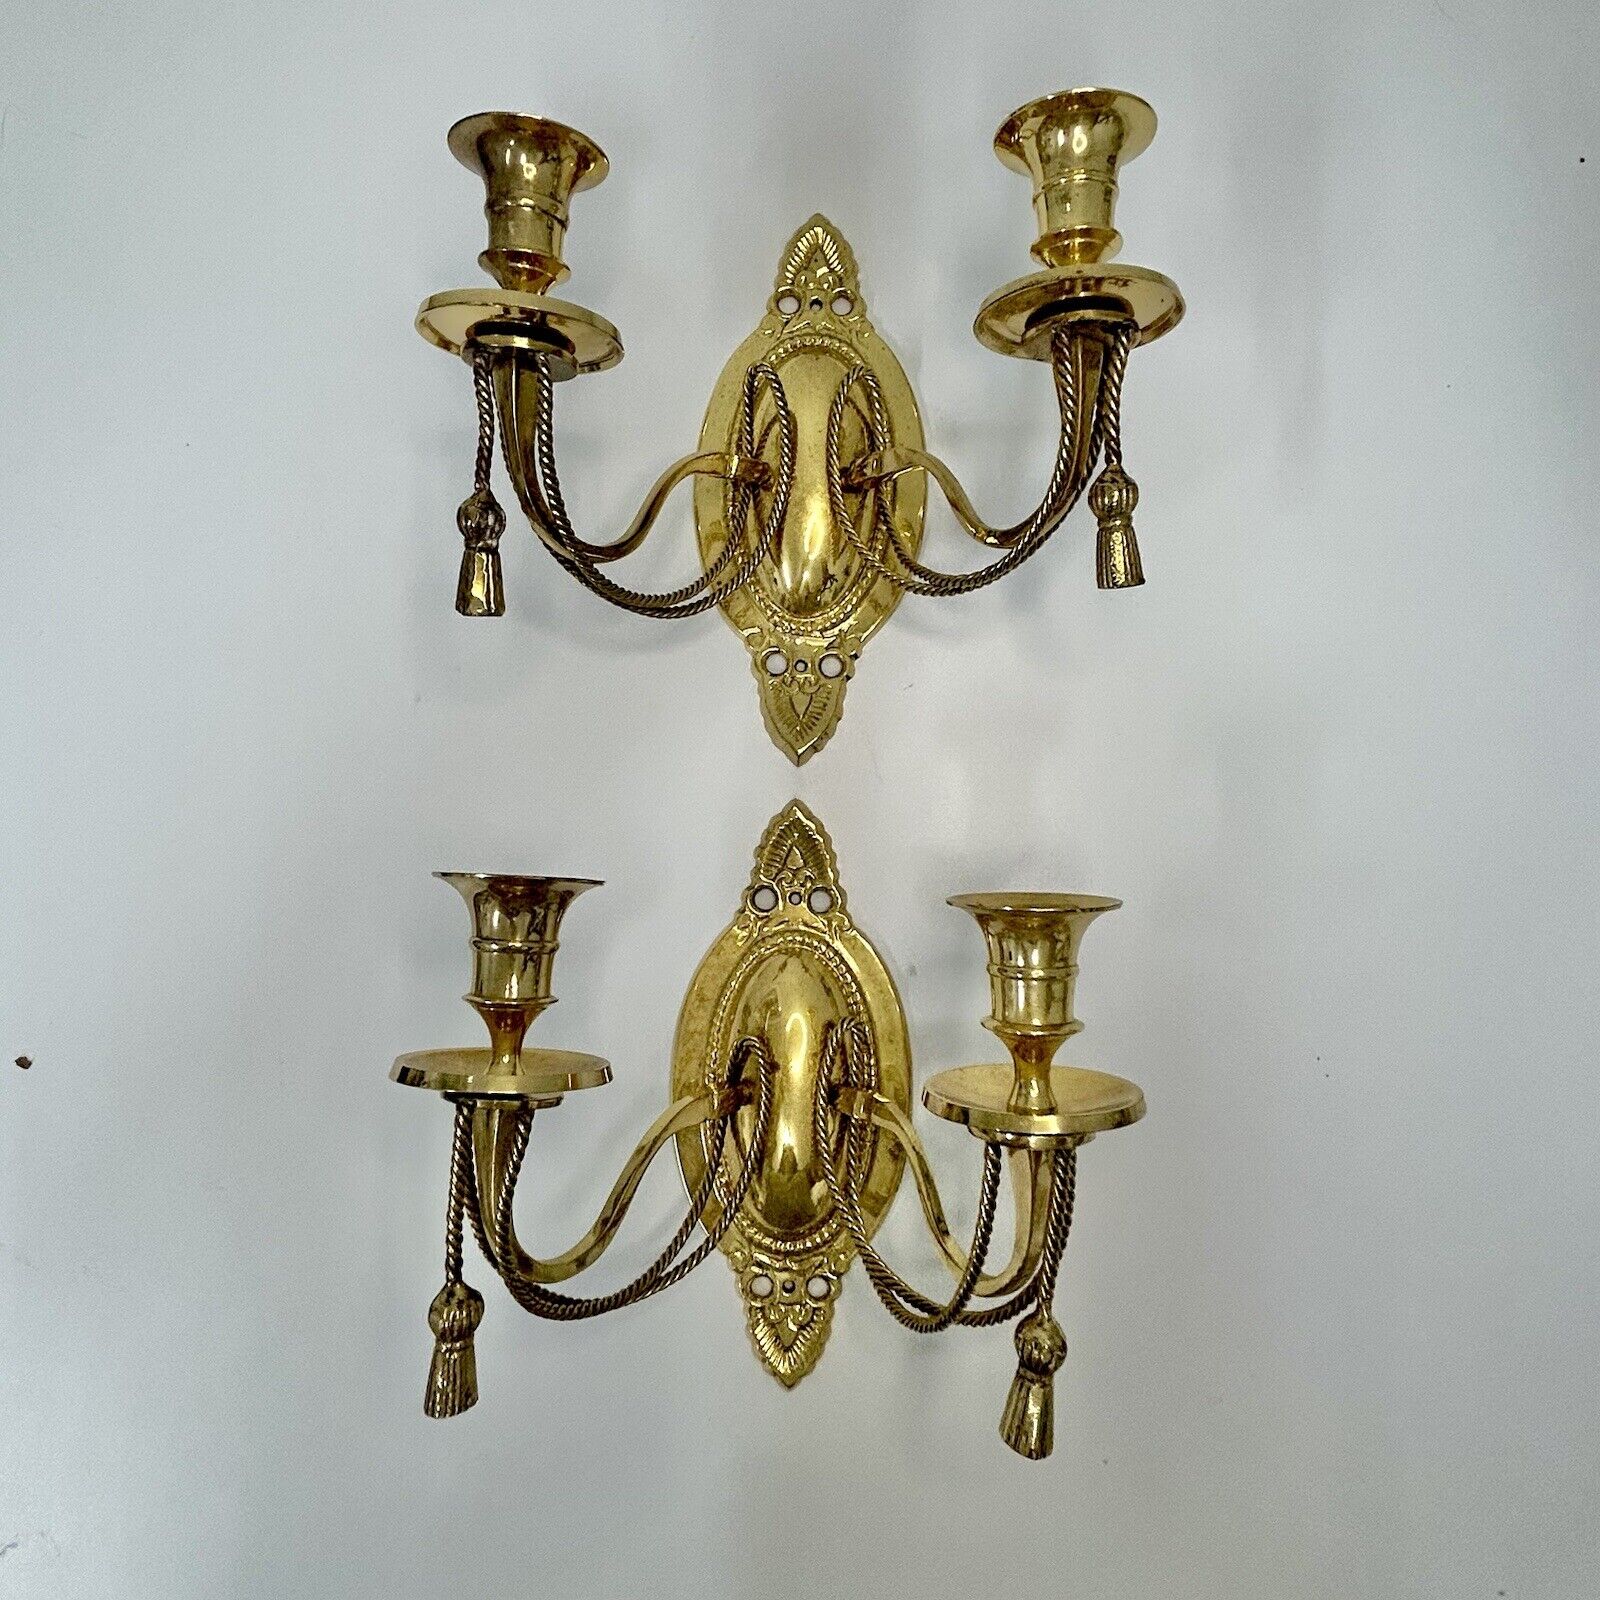 Brass Wall Mount Sconces Candle Holders Rope Tassels Pair Of 2 India READ